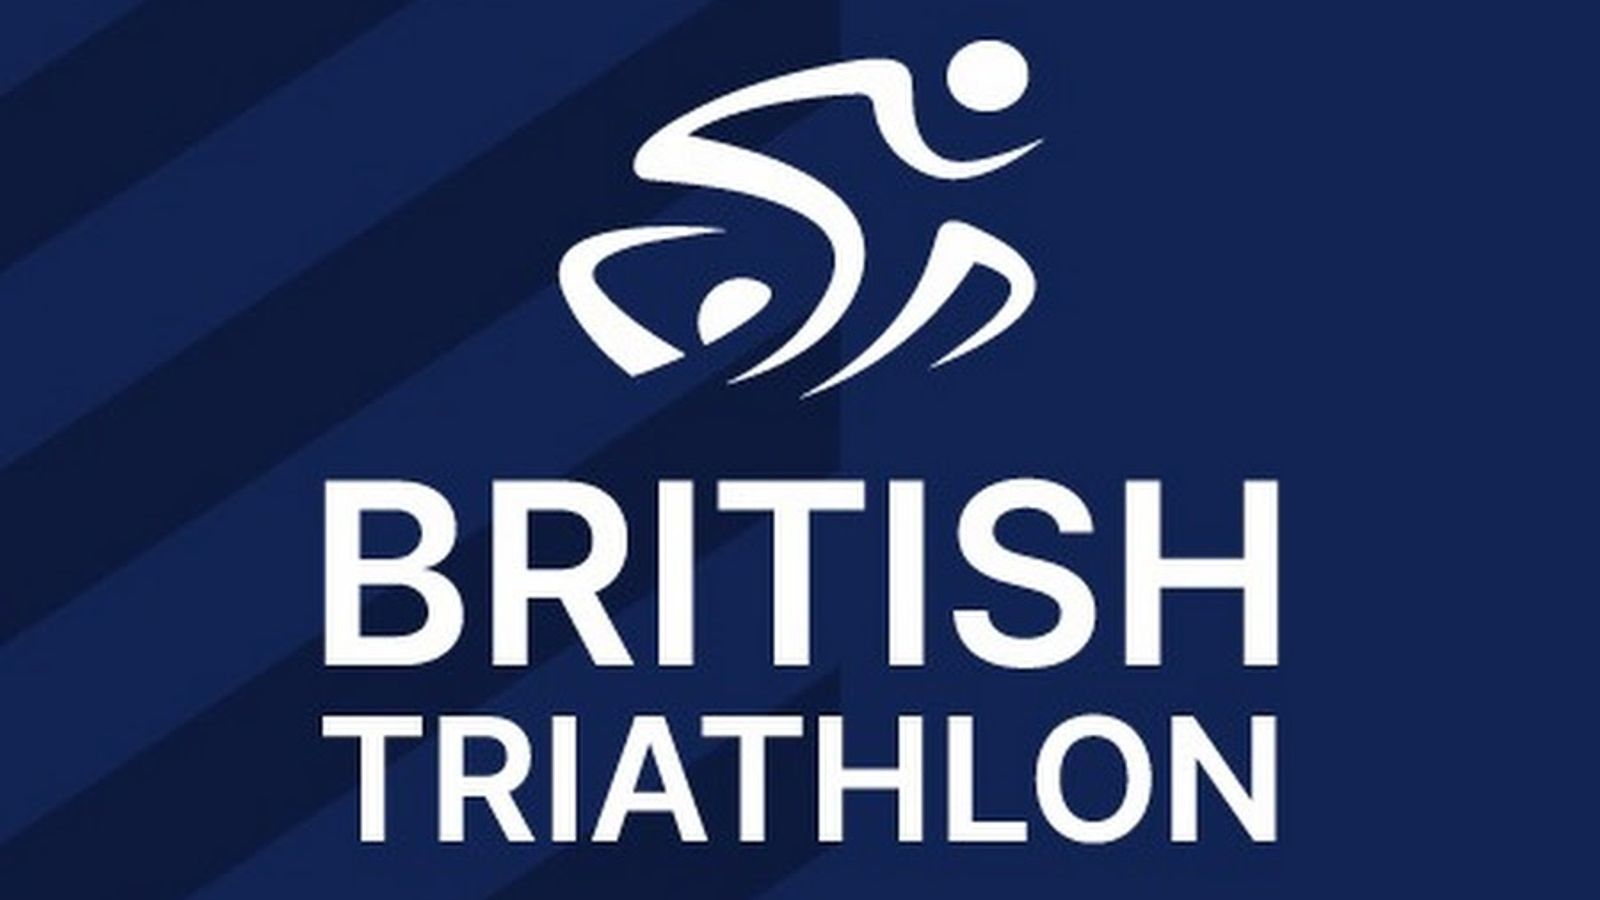 British Triathlon to introduce open category for men and trans women